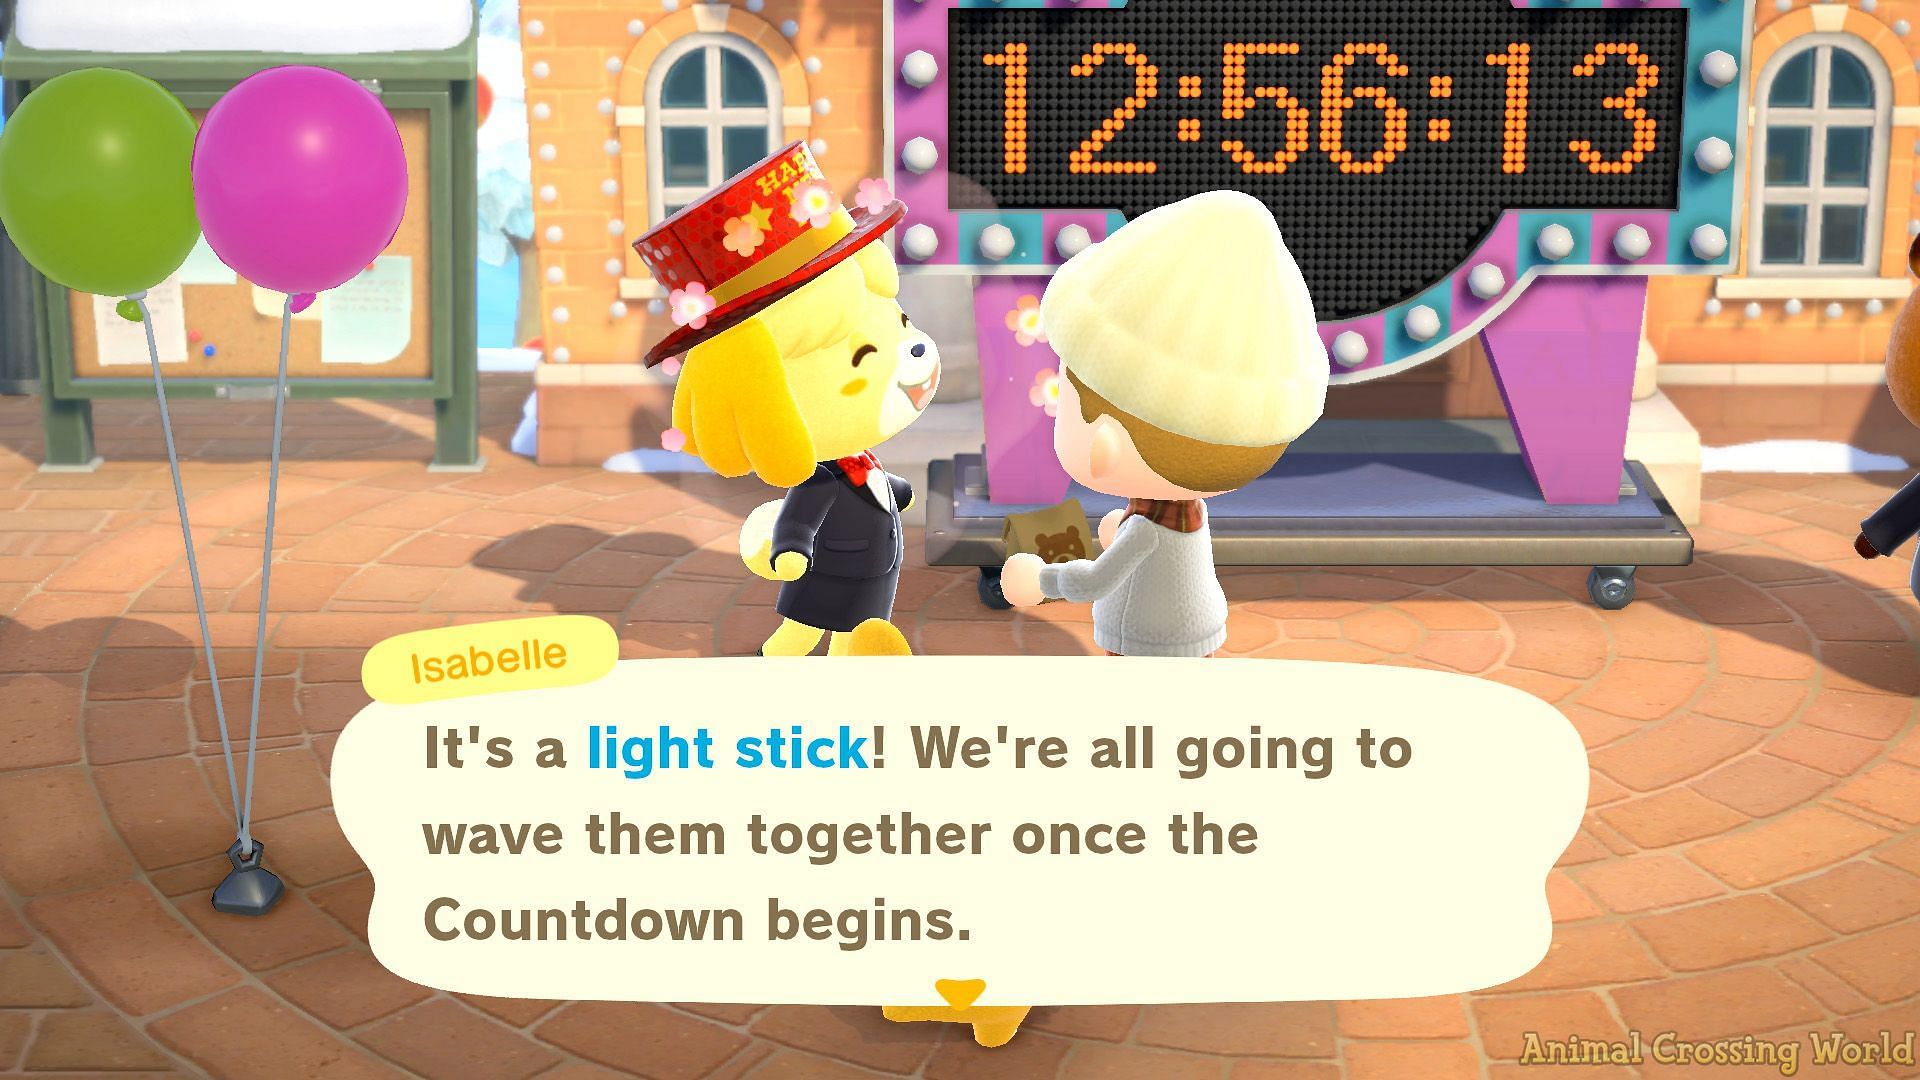 Isabelle will give players a Light Stick for the event (Image via Animal Crossing World)